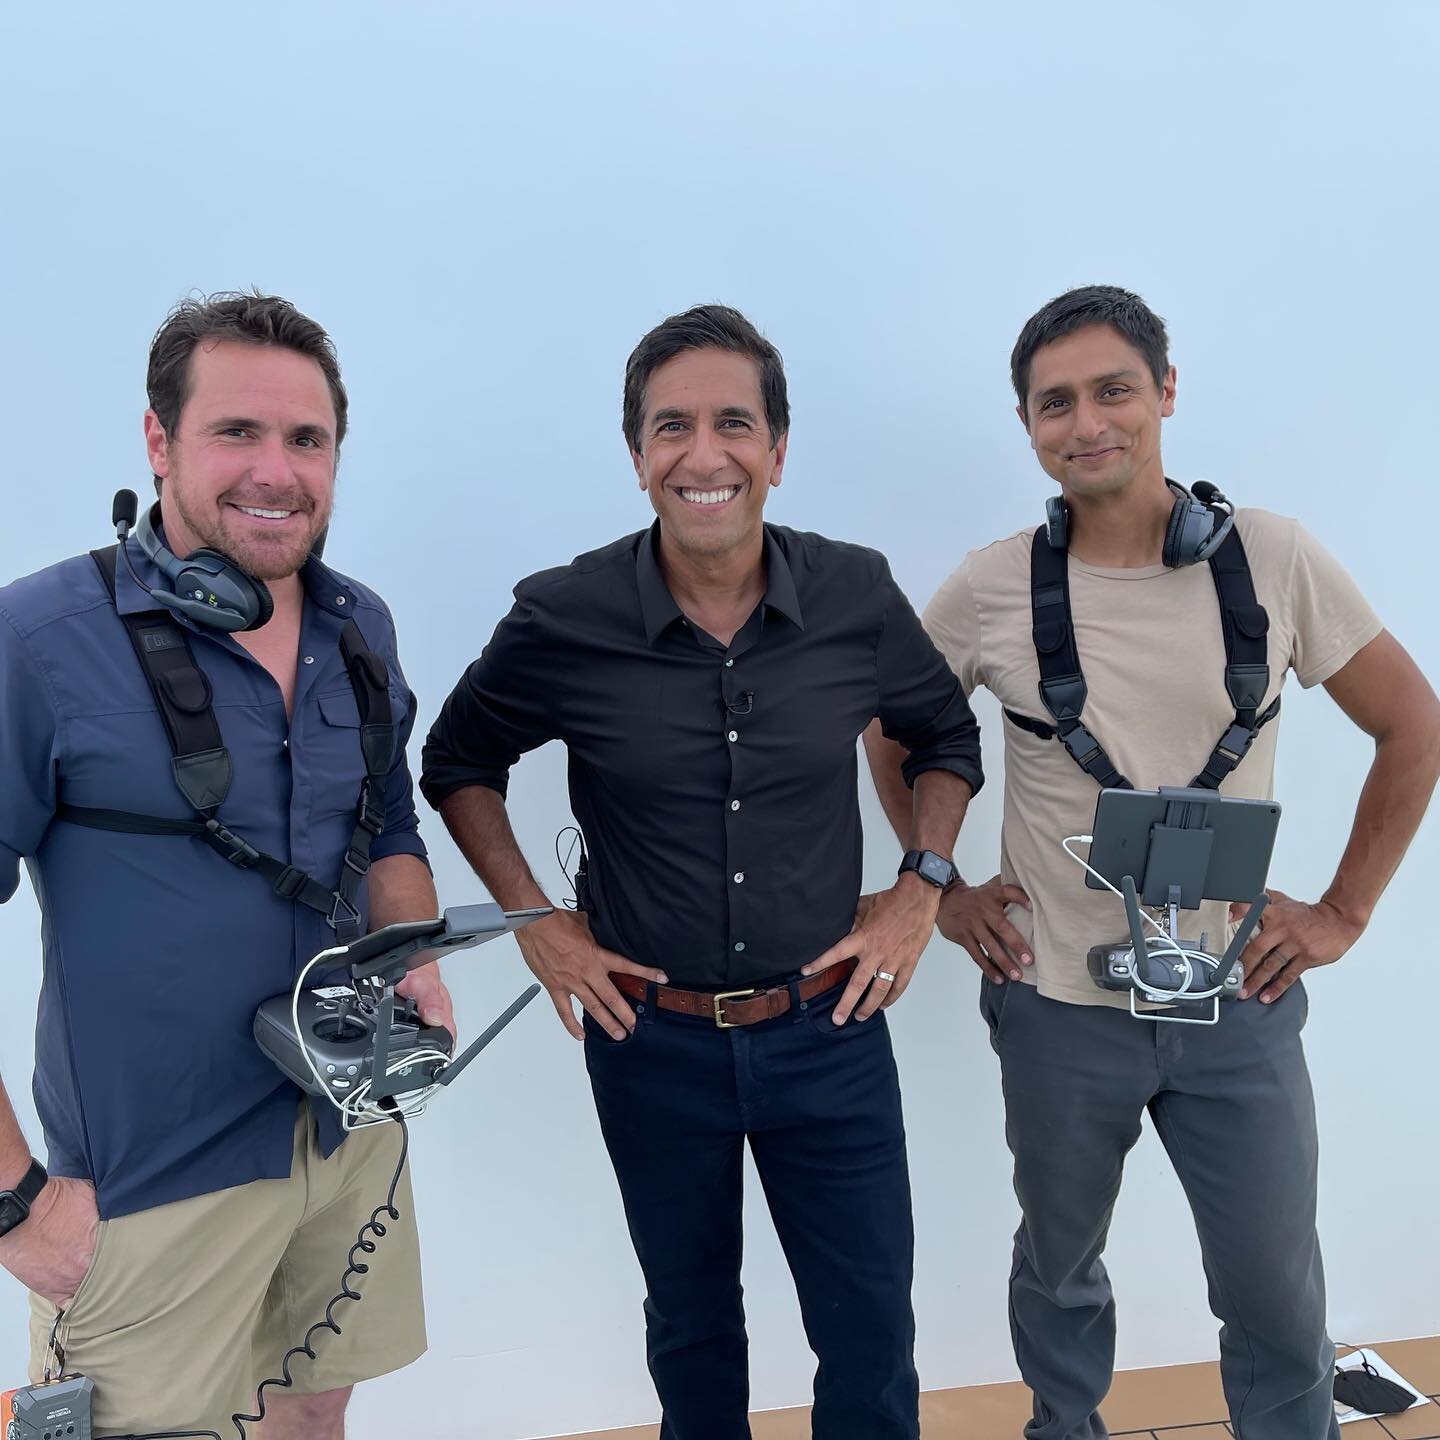 A pleasure to work with Dr. Sanjay Gupta!
Such a rational, insightful and sincere man. 
Thanks for having us!
A big thank you to #celebritycruises  @drsanjaygupta @captainkatemccue @celebritycruises @steadishot @xizmomedia #drones #floridadronesquad 